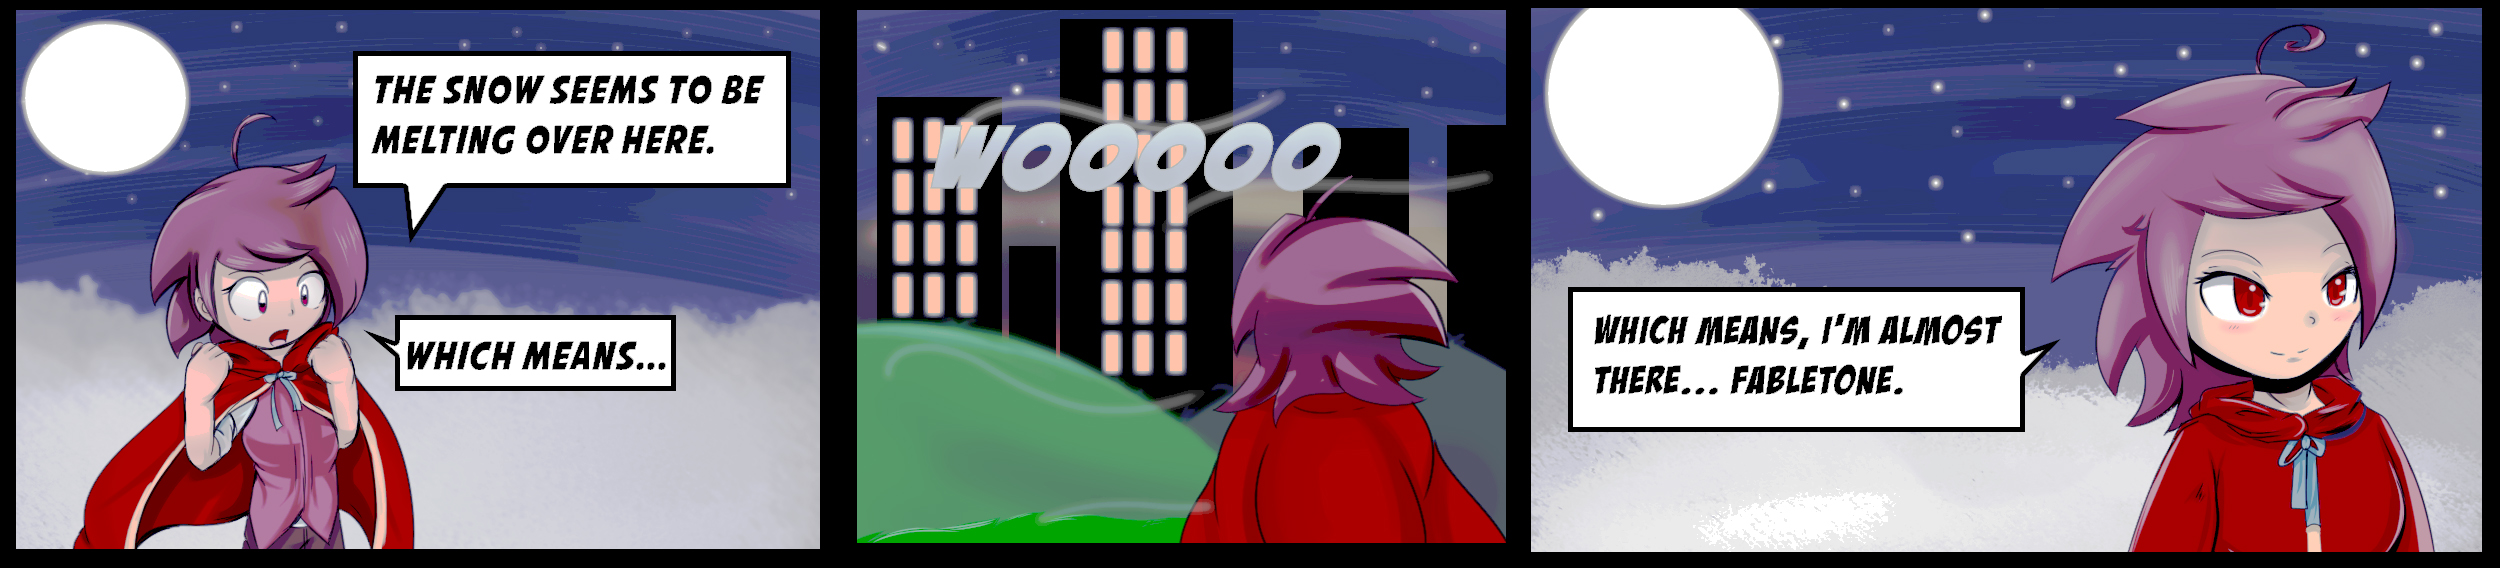 Comic strip of girl in red cloak walking up hill toward cityscape with night sky above.